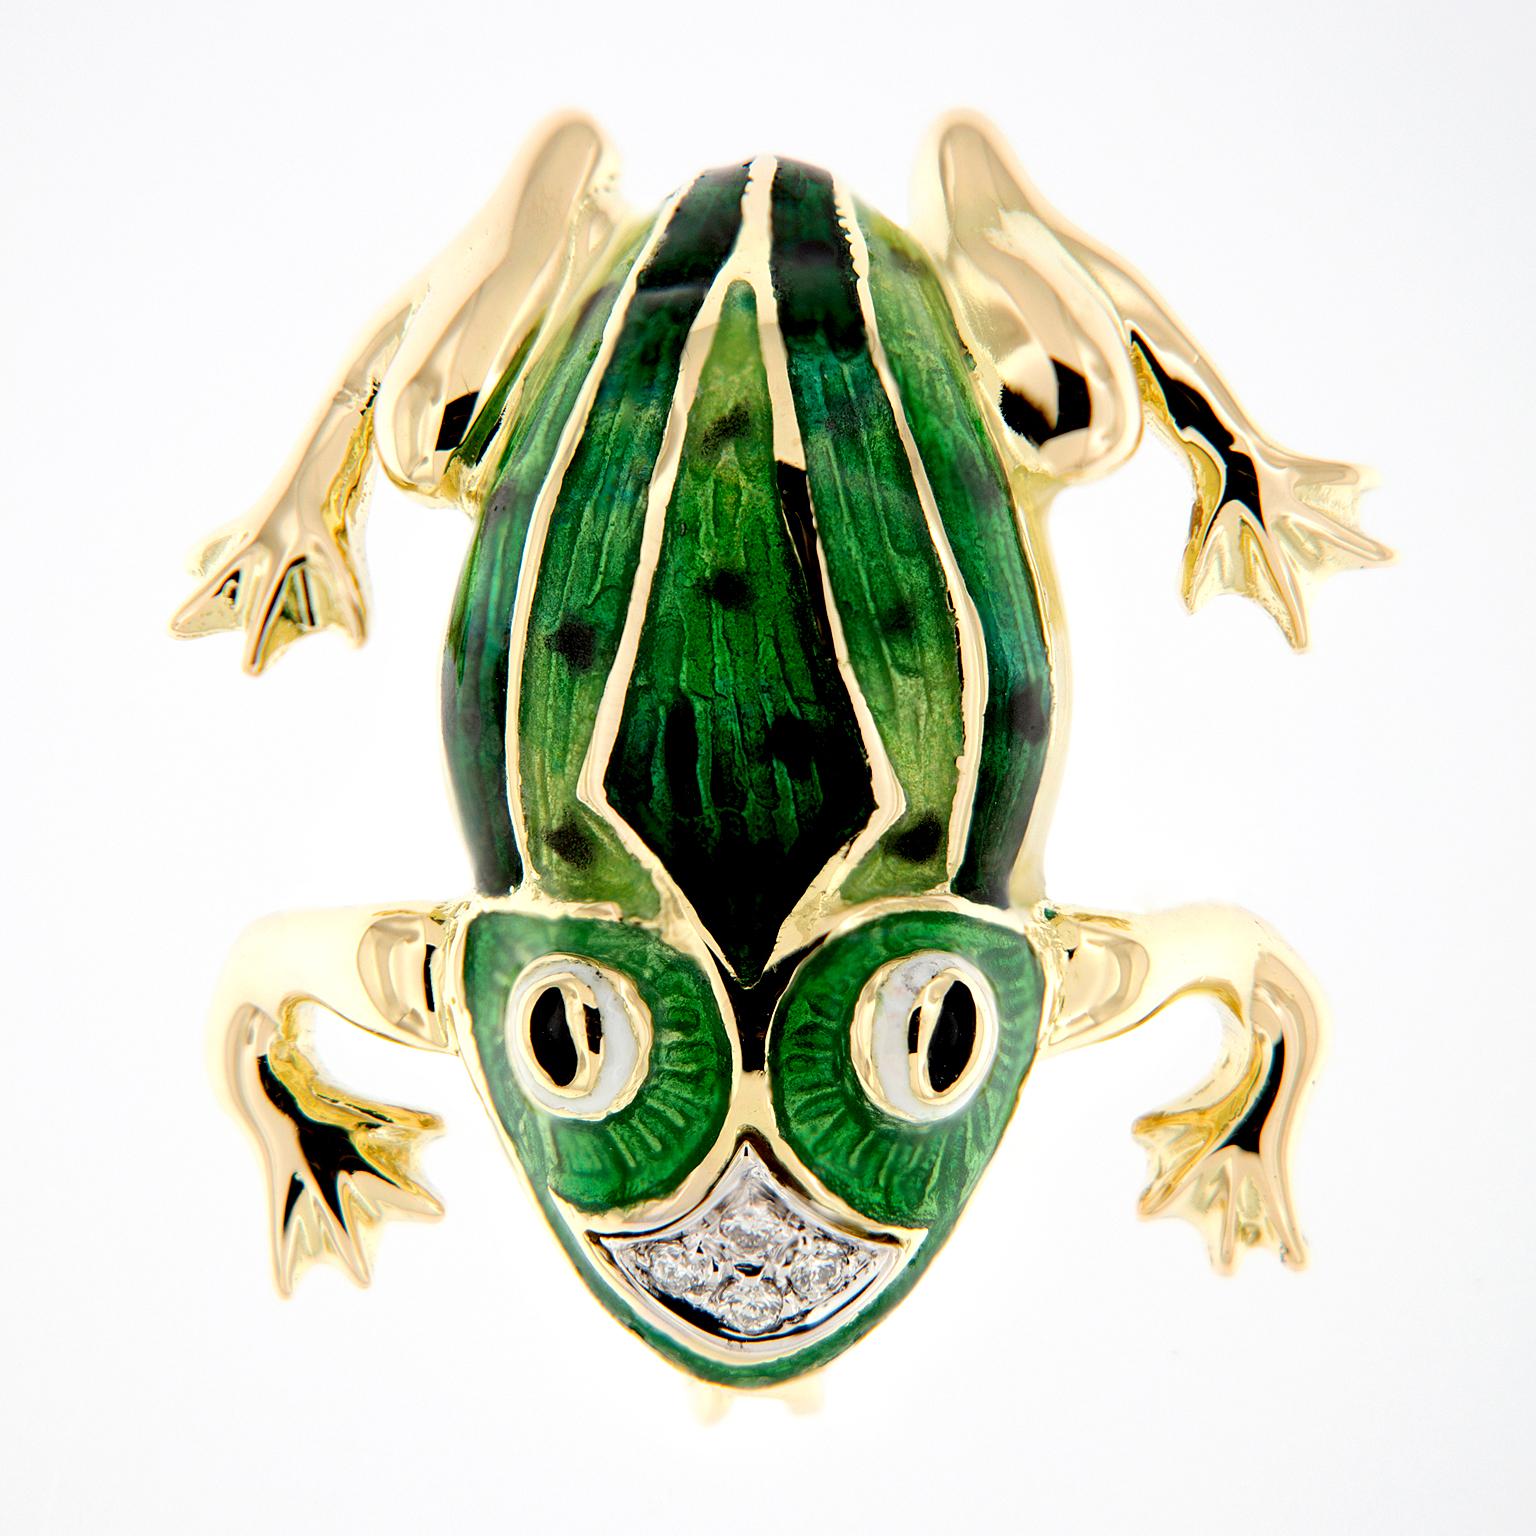 A lovely enameled frog pin, made in Italy and crafted in 18k yellow gold. This piece features rich, green enamel work and accented with four diamonds. Can be also worn as a pendant. Weighs 12 grams.

Diamonds 0.04 cttw